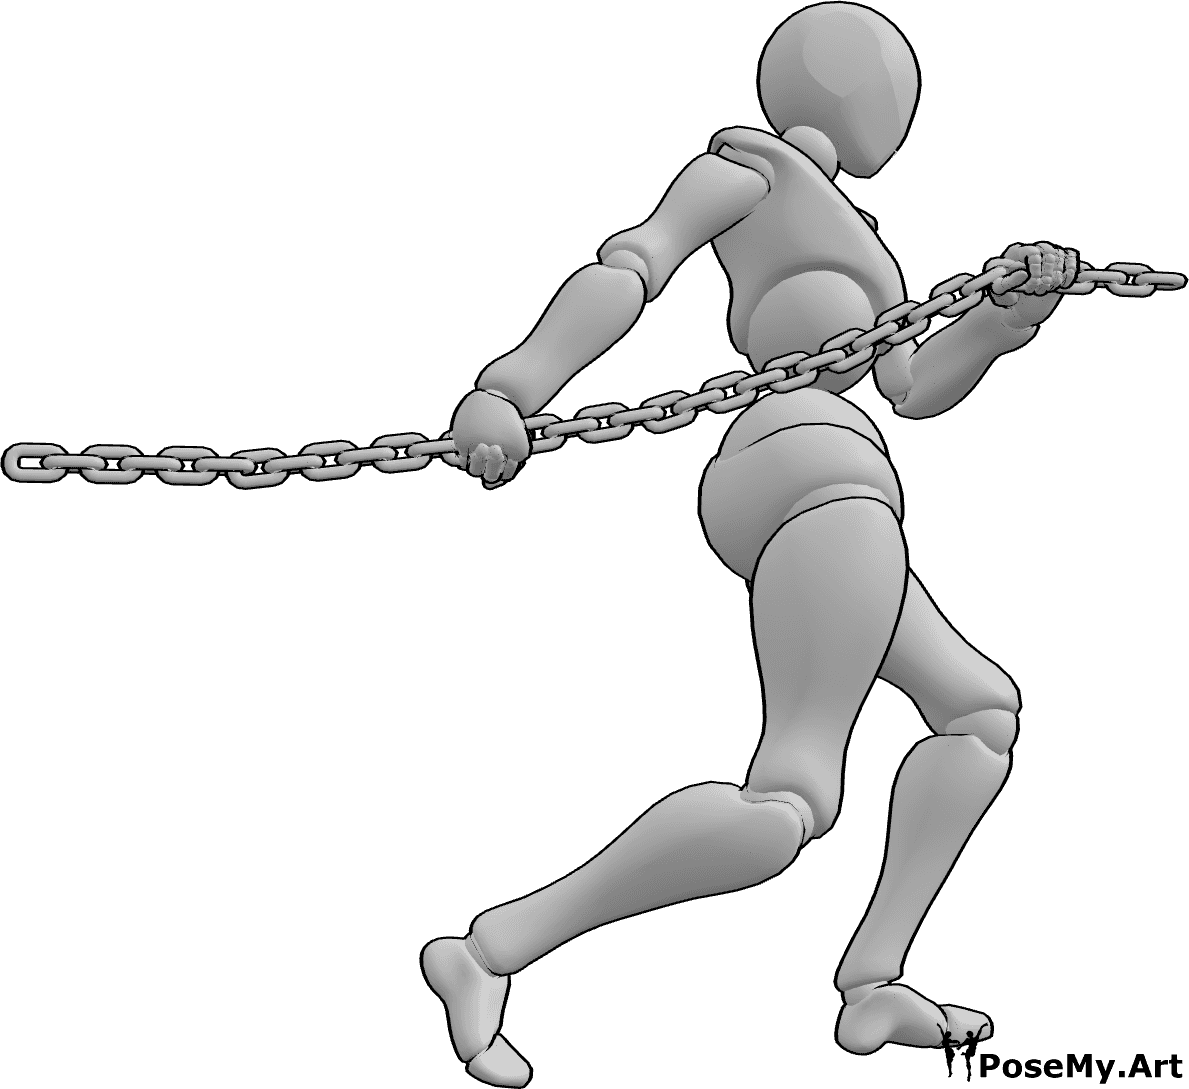 Pose Reference - Female walking pulling pose - Female is walking and pulling a chain with two hands